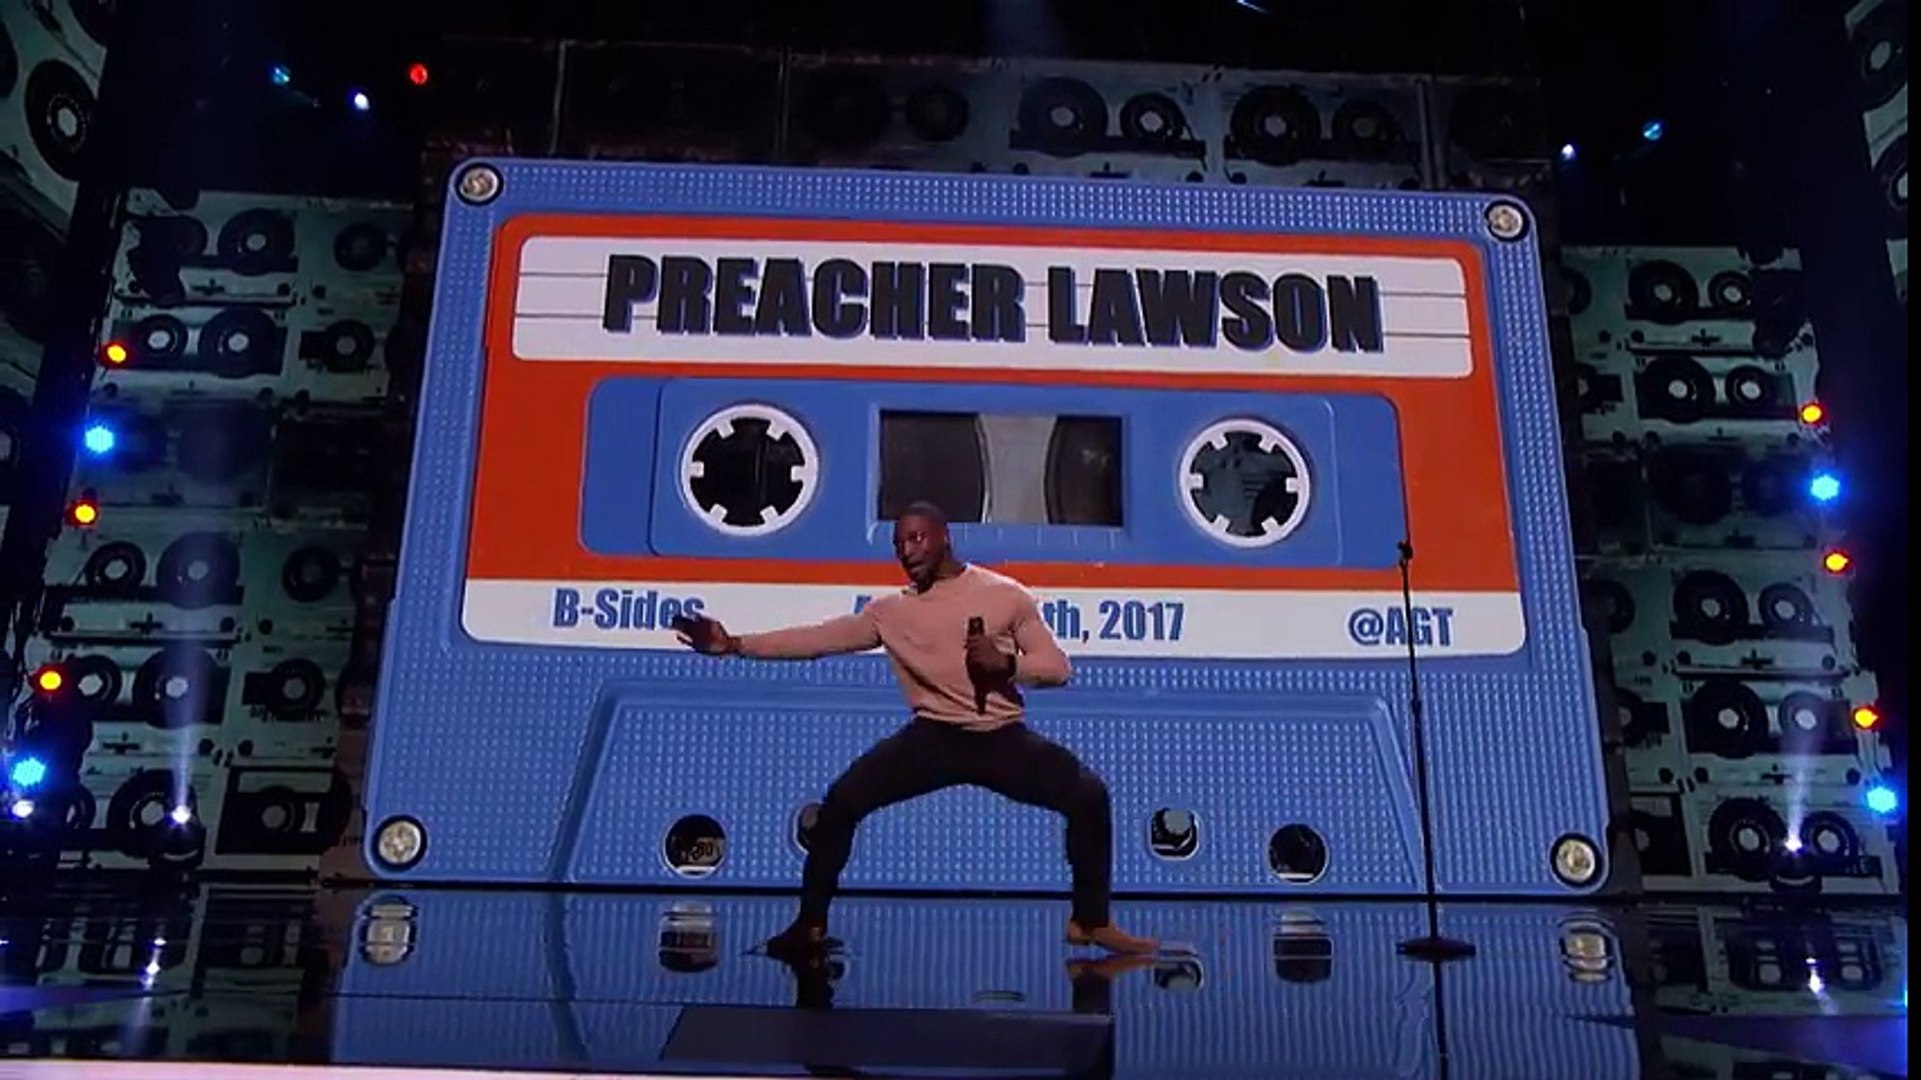 Preacher Lawson- Comedian Covers Clapping to Smartphones America's Got Talent 2017